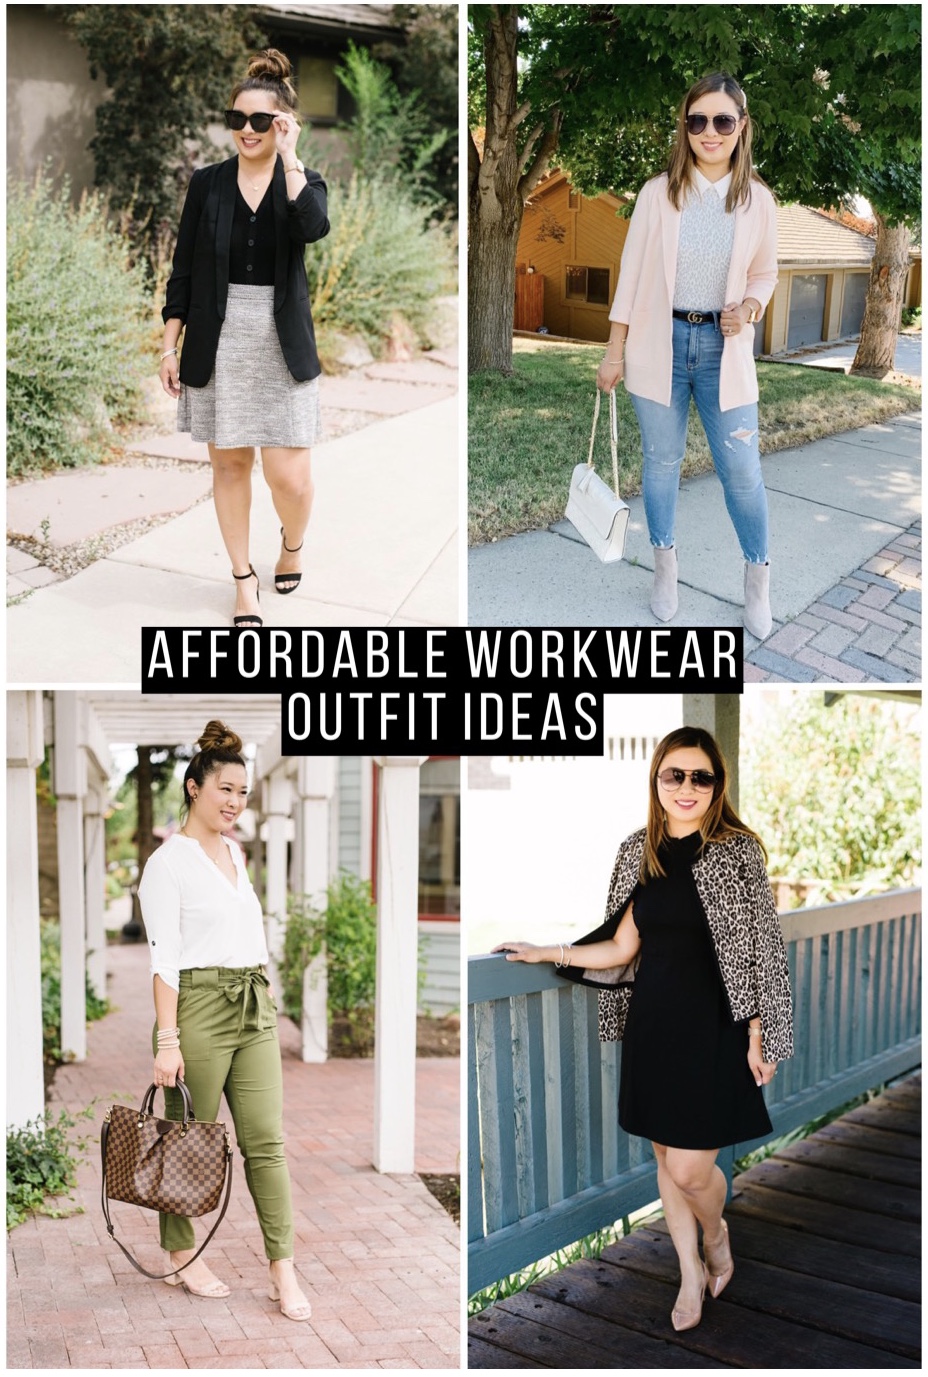 Affordable Workwear Outfit Inspiration - Summer To Fall Transitional